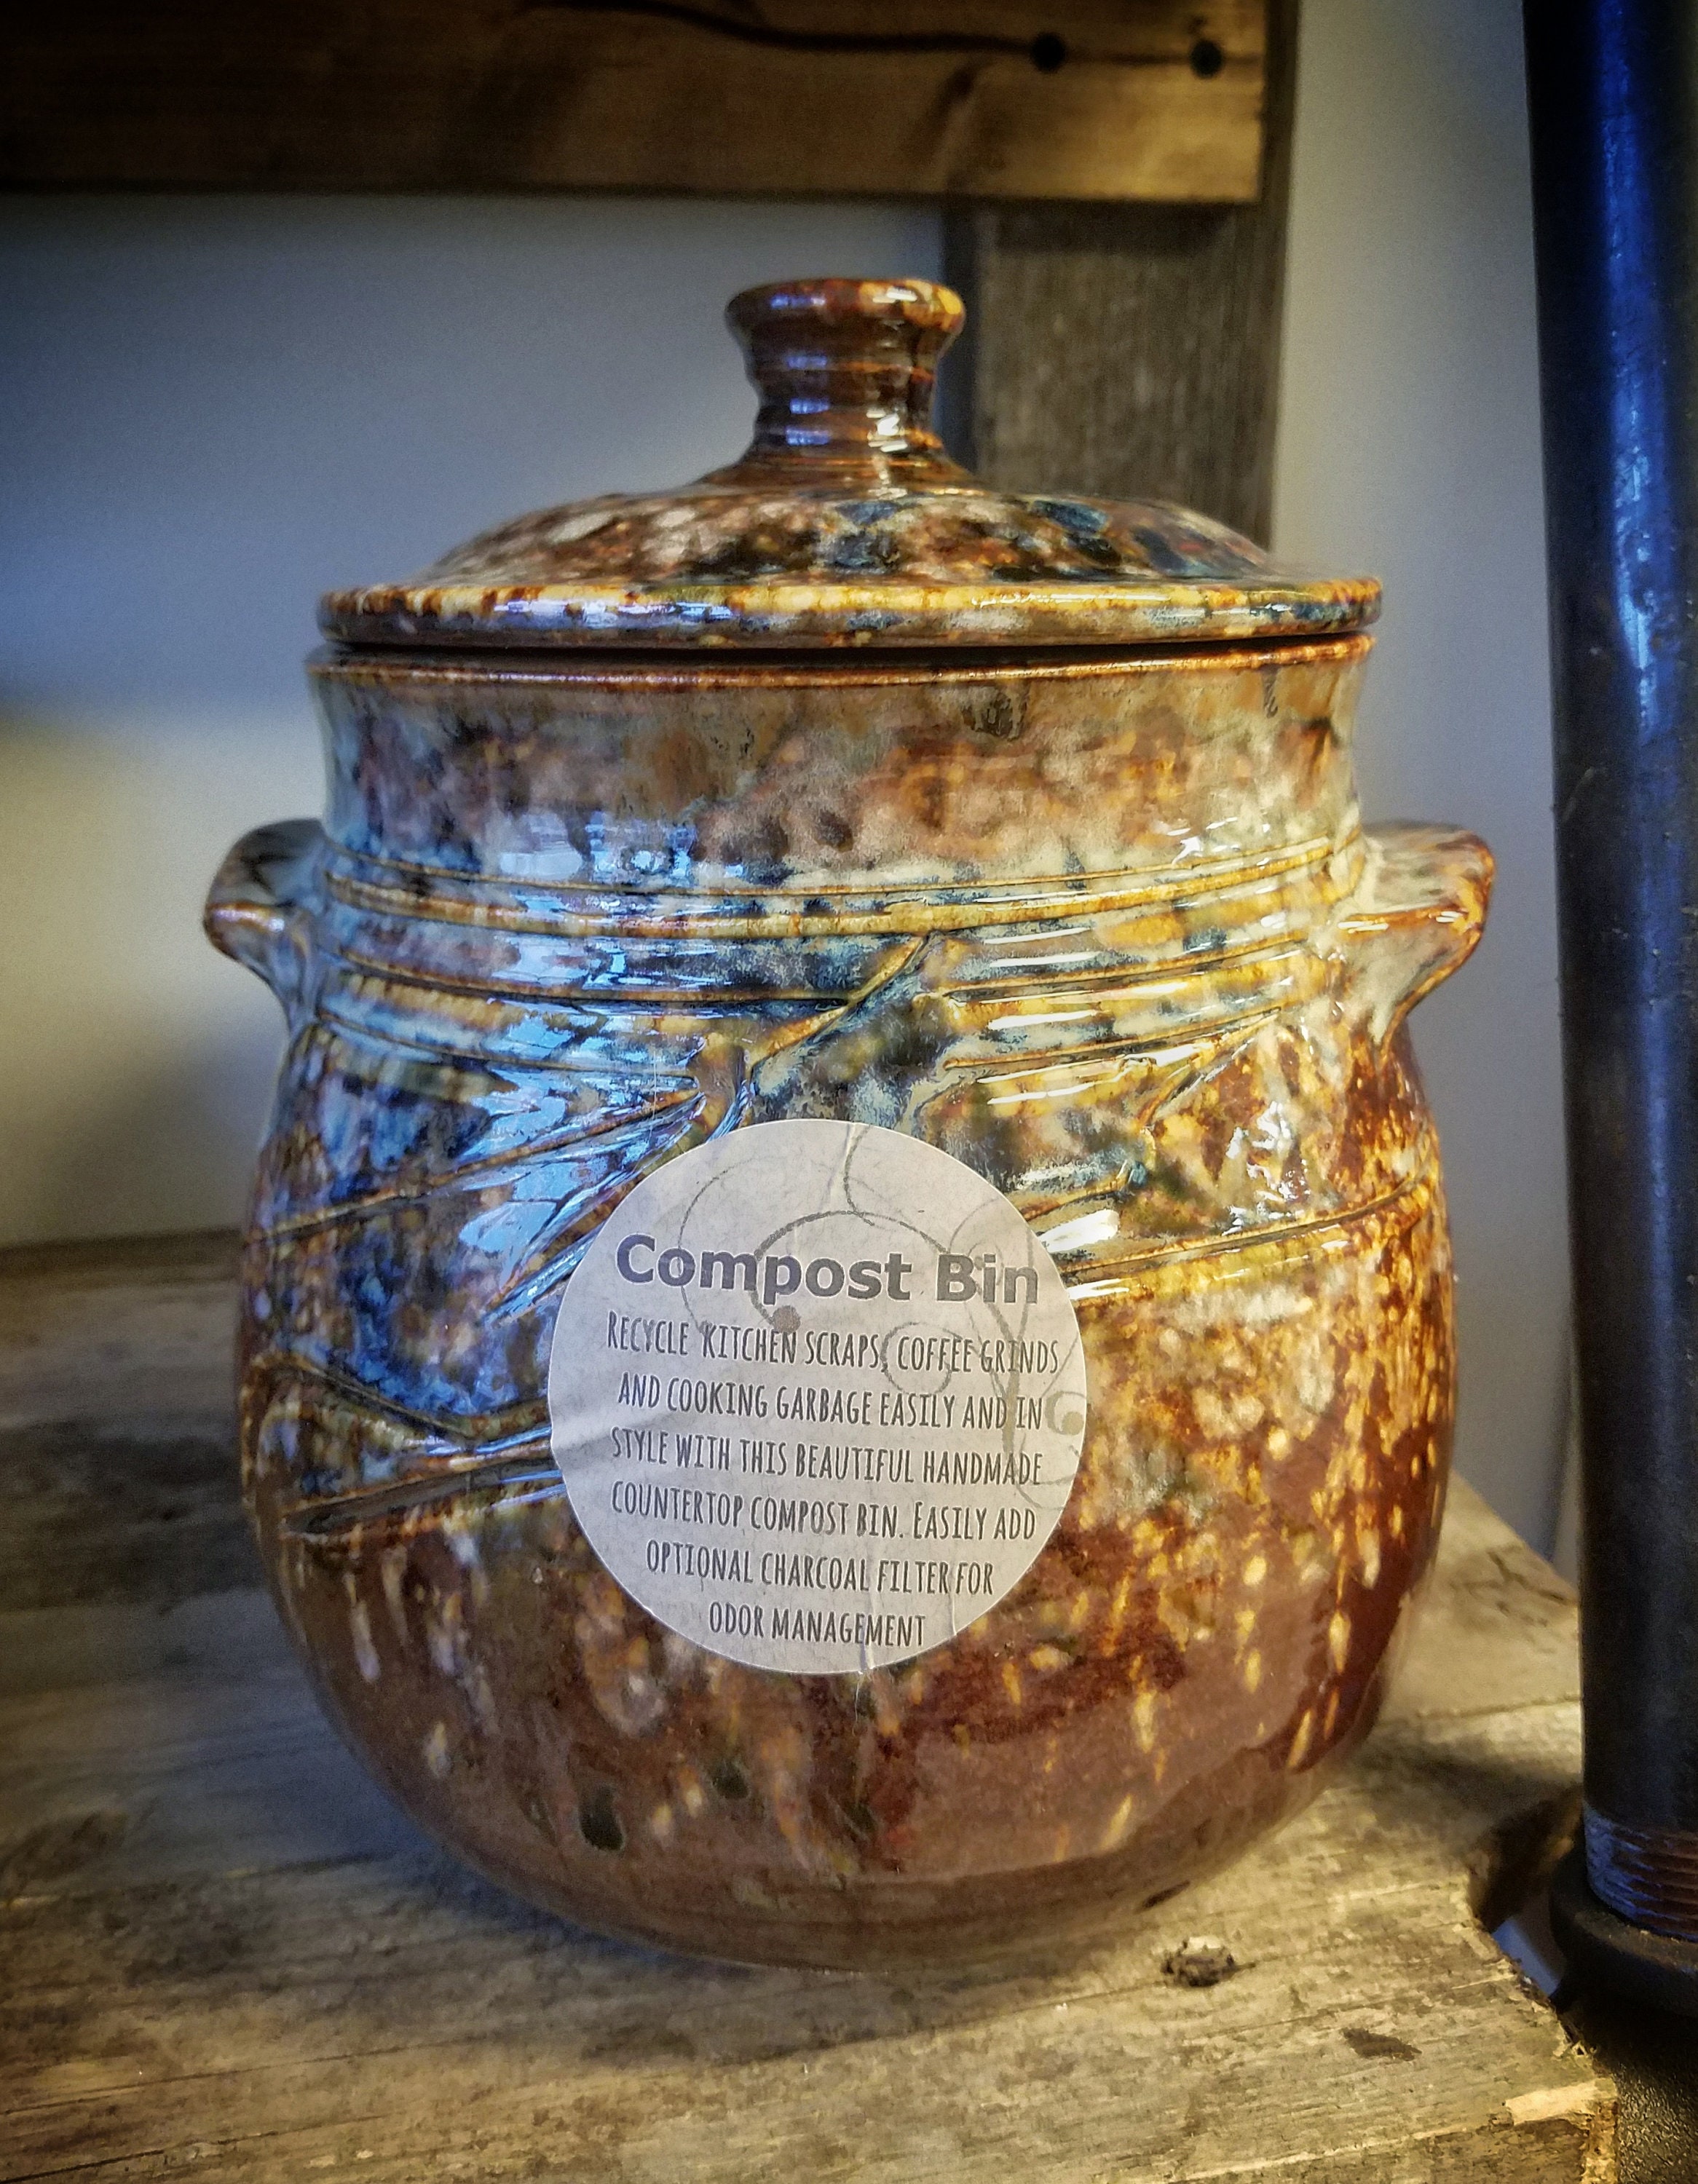 Pottery Compost Pot / Compost Bin / Composting / Pottery Jar /pottery  Composting Jar / Pottery Compost Pot / Green Living / Recycling / Gift 